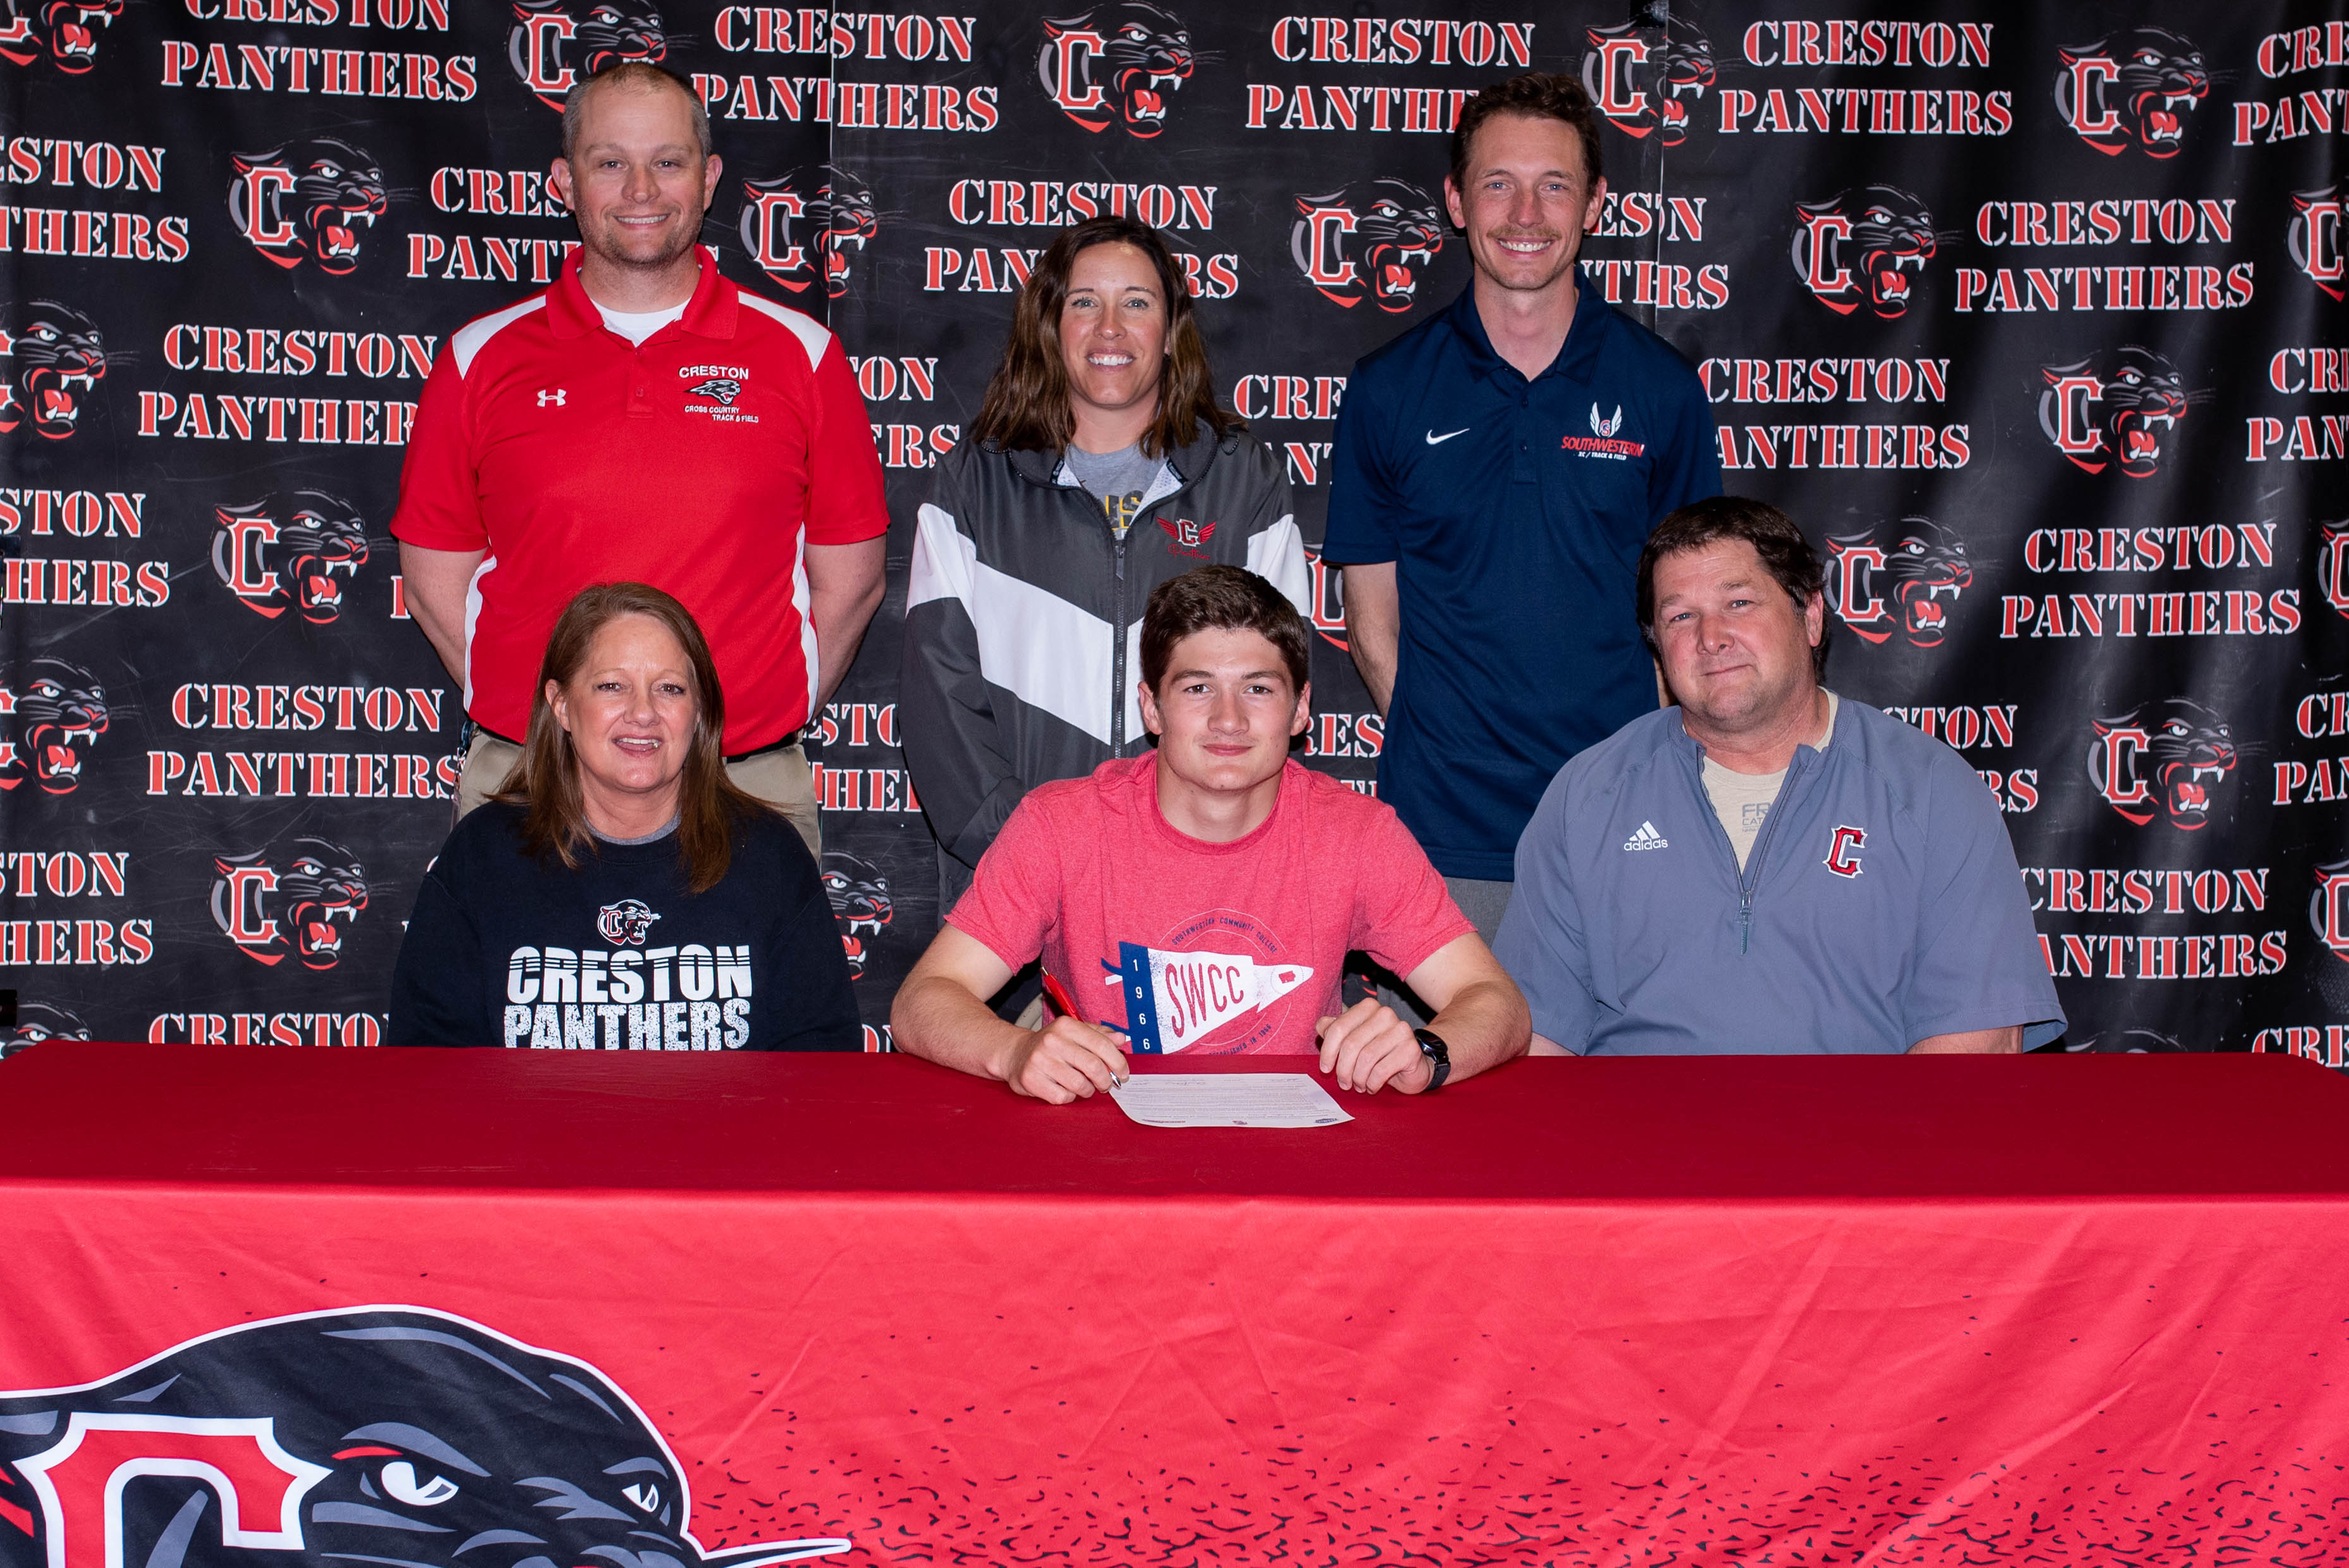 Brandon Briley, center, signs his National Letter of Intent to run cross country and track at Southwestern next year. Also pictured, in front, are his parents Treana and Chad Briley. In back, from left, are Creston track coaches Clay and Maggie Arnold, and SWCC cross country/track coach Scott Vicker.